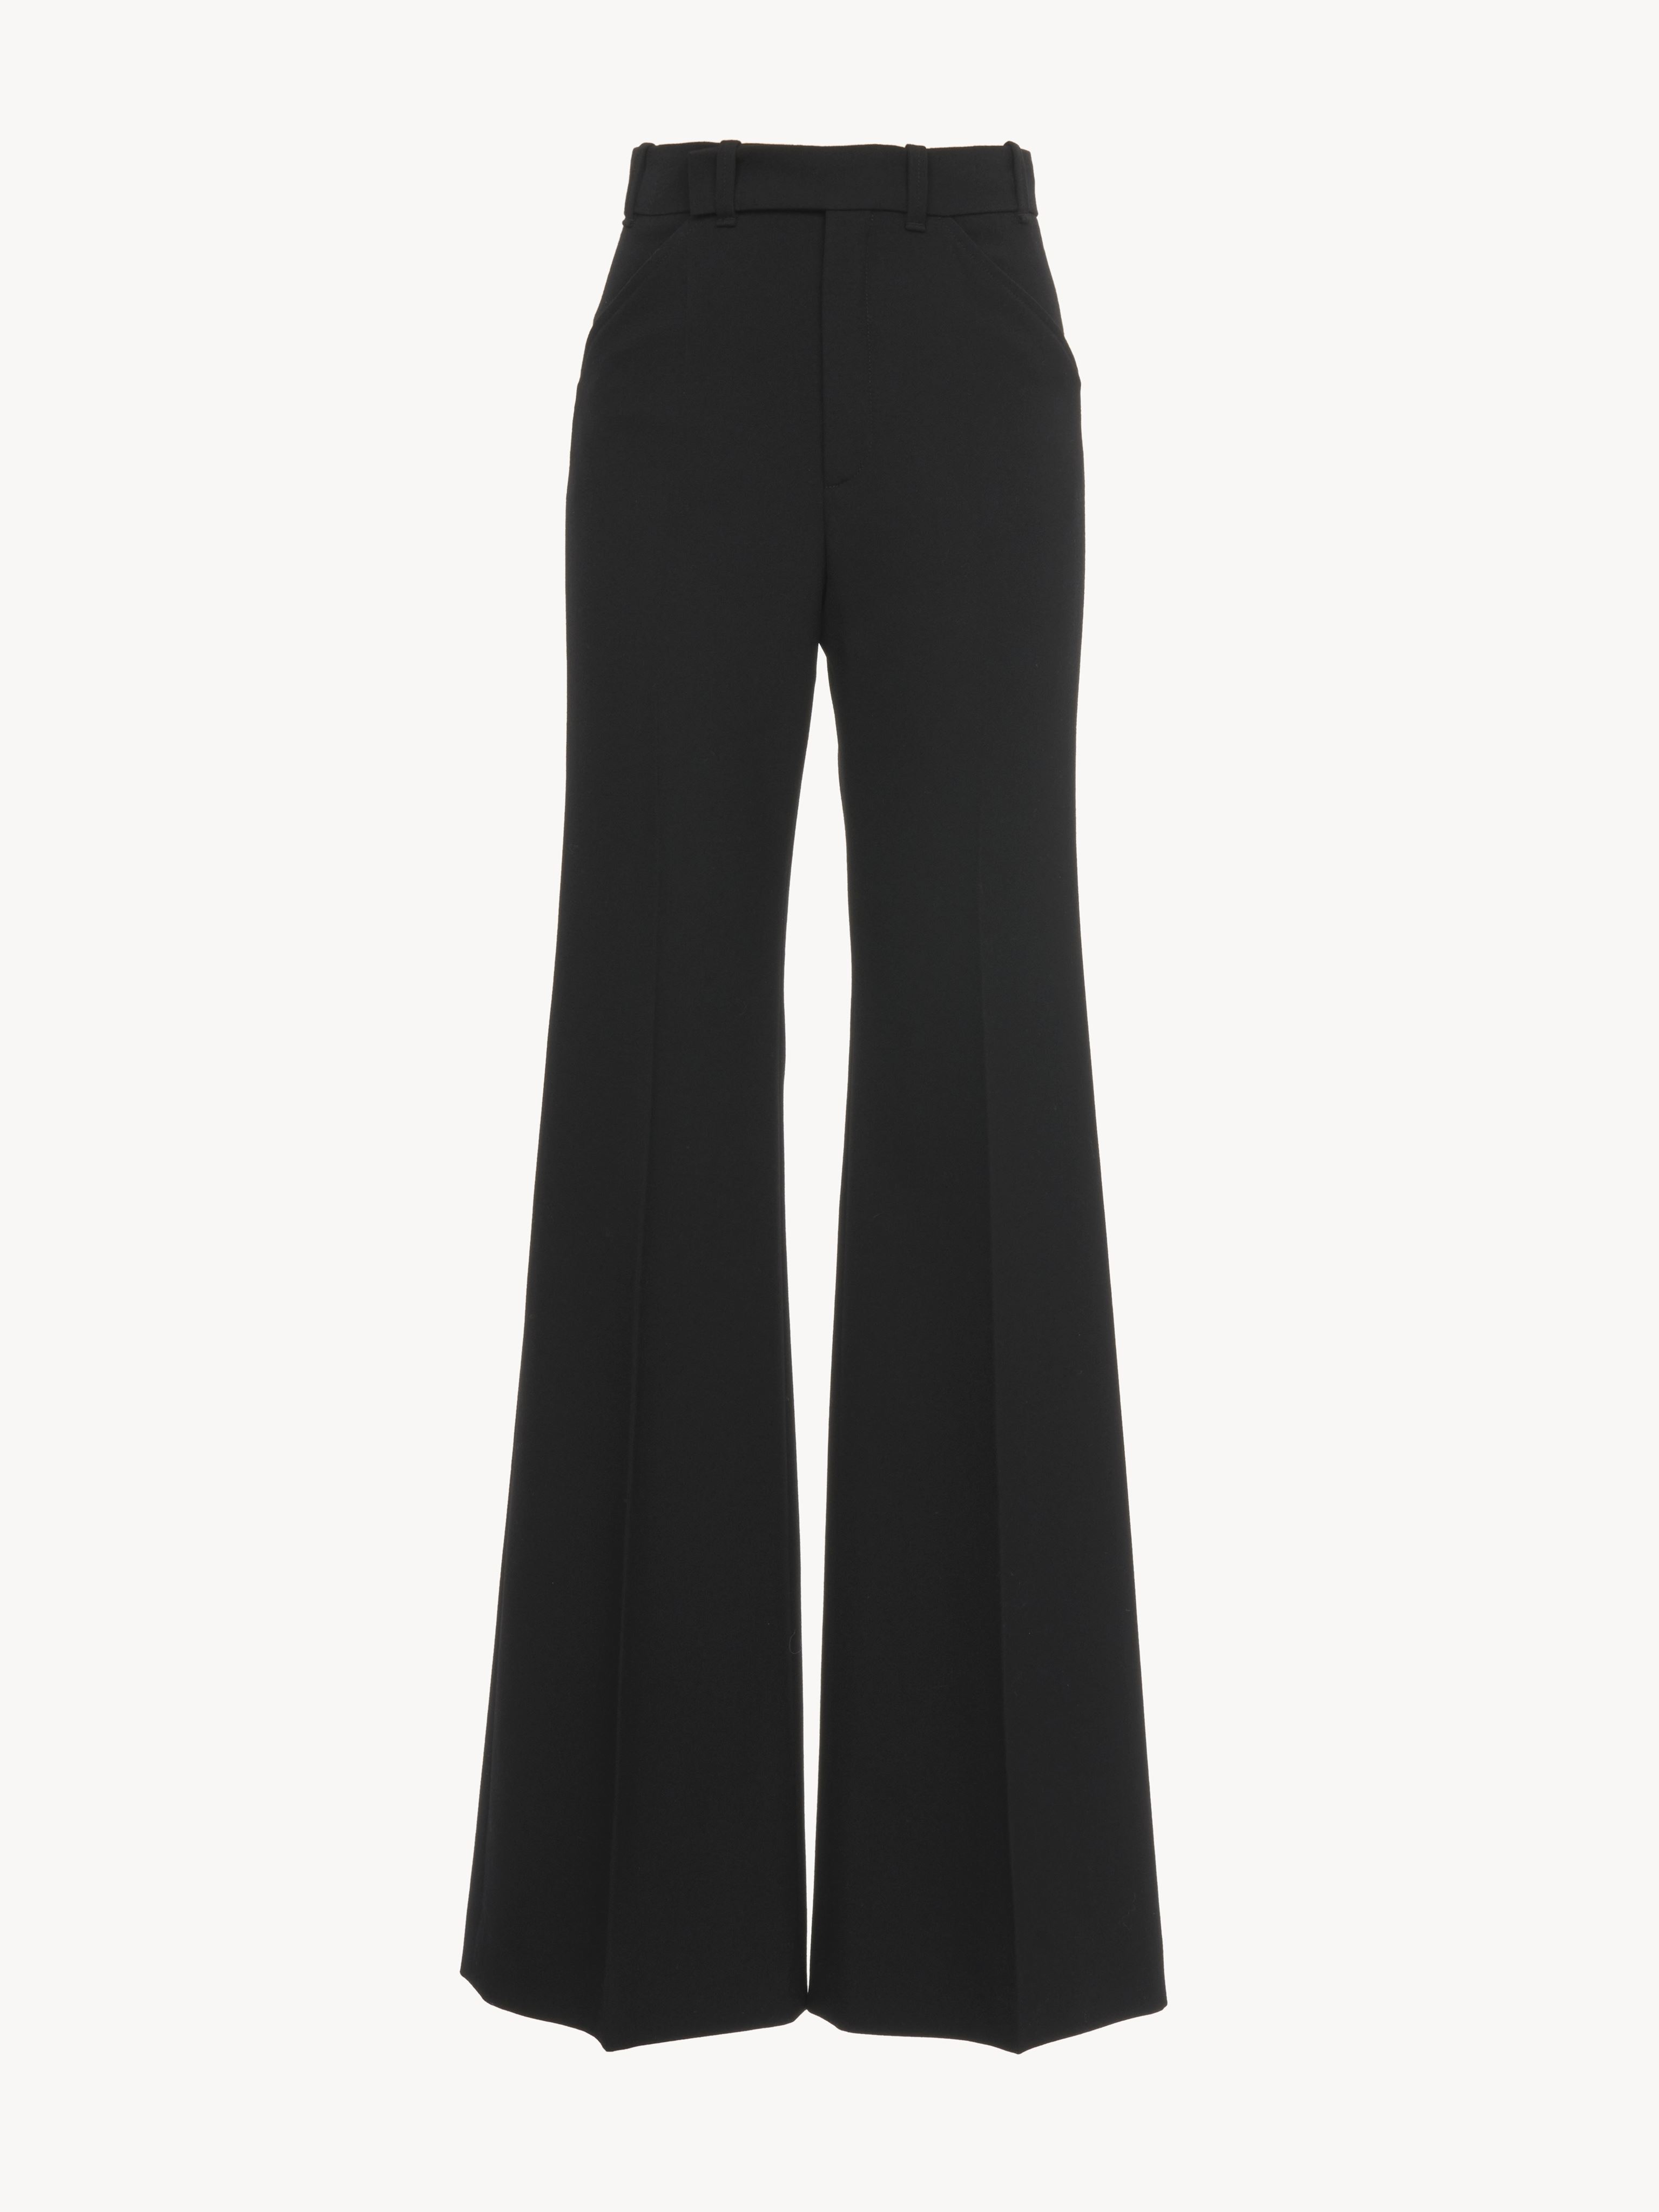 Chloé Tailored Trousers Black Size 6 100% Virgin Wool